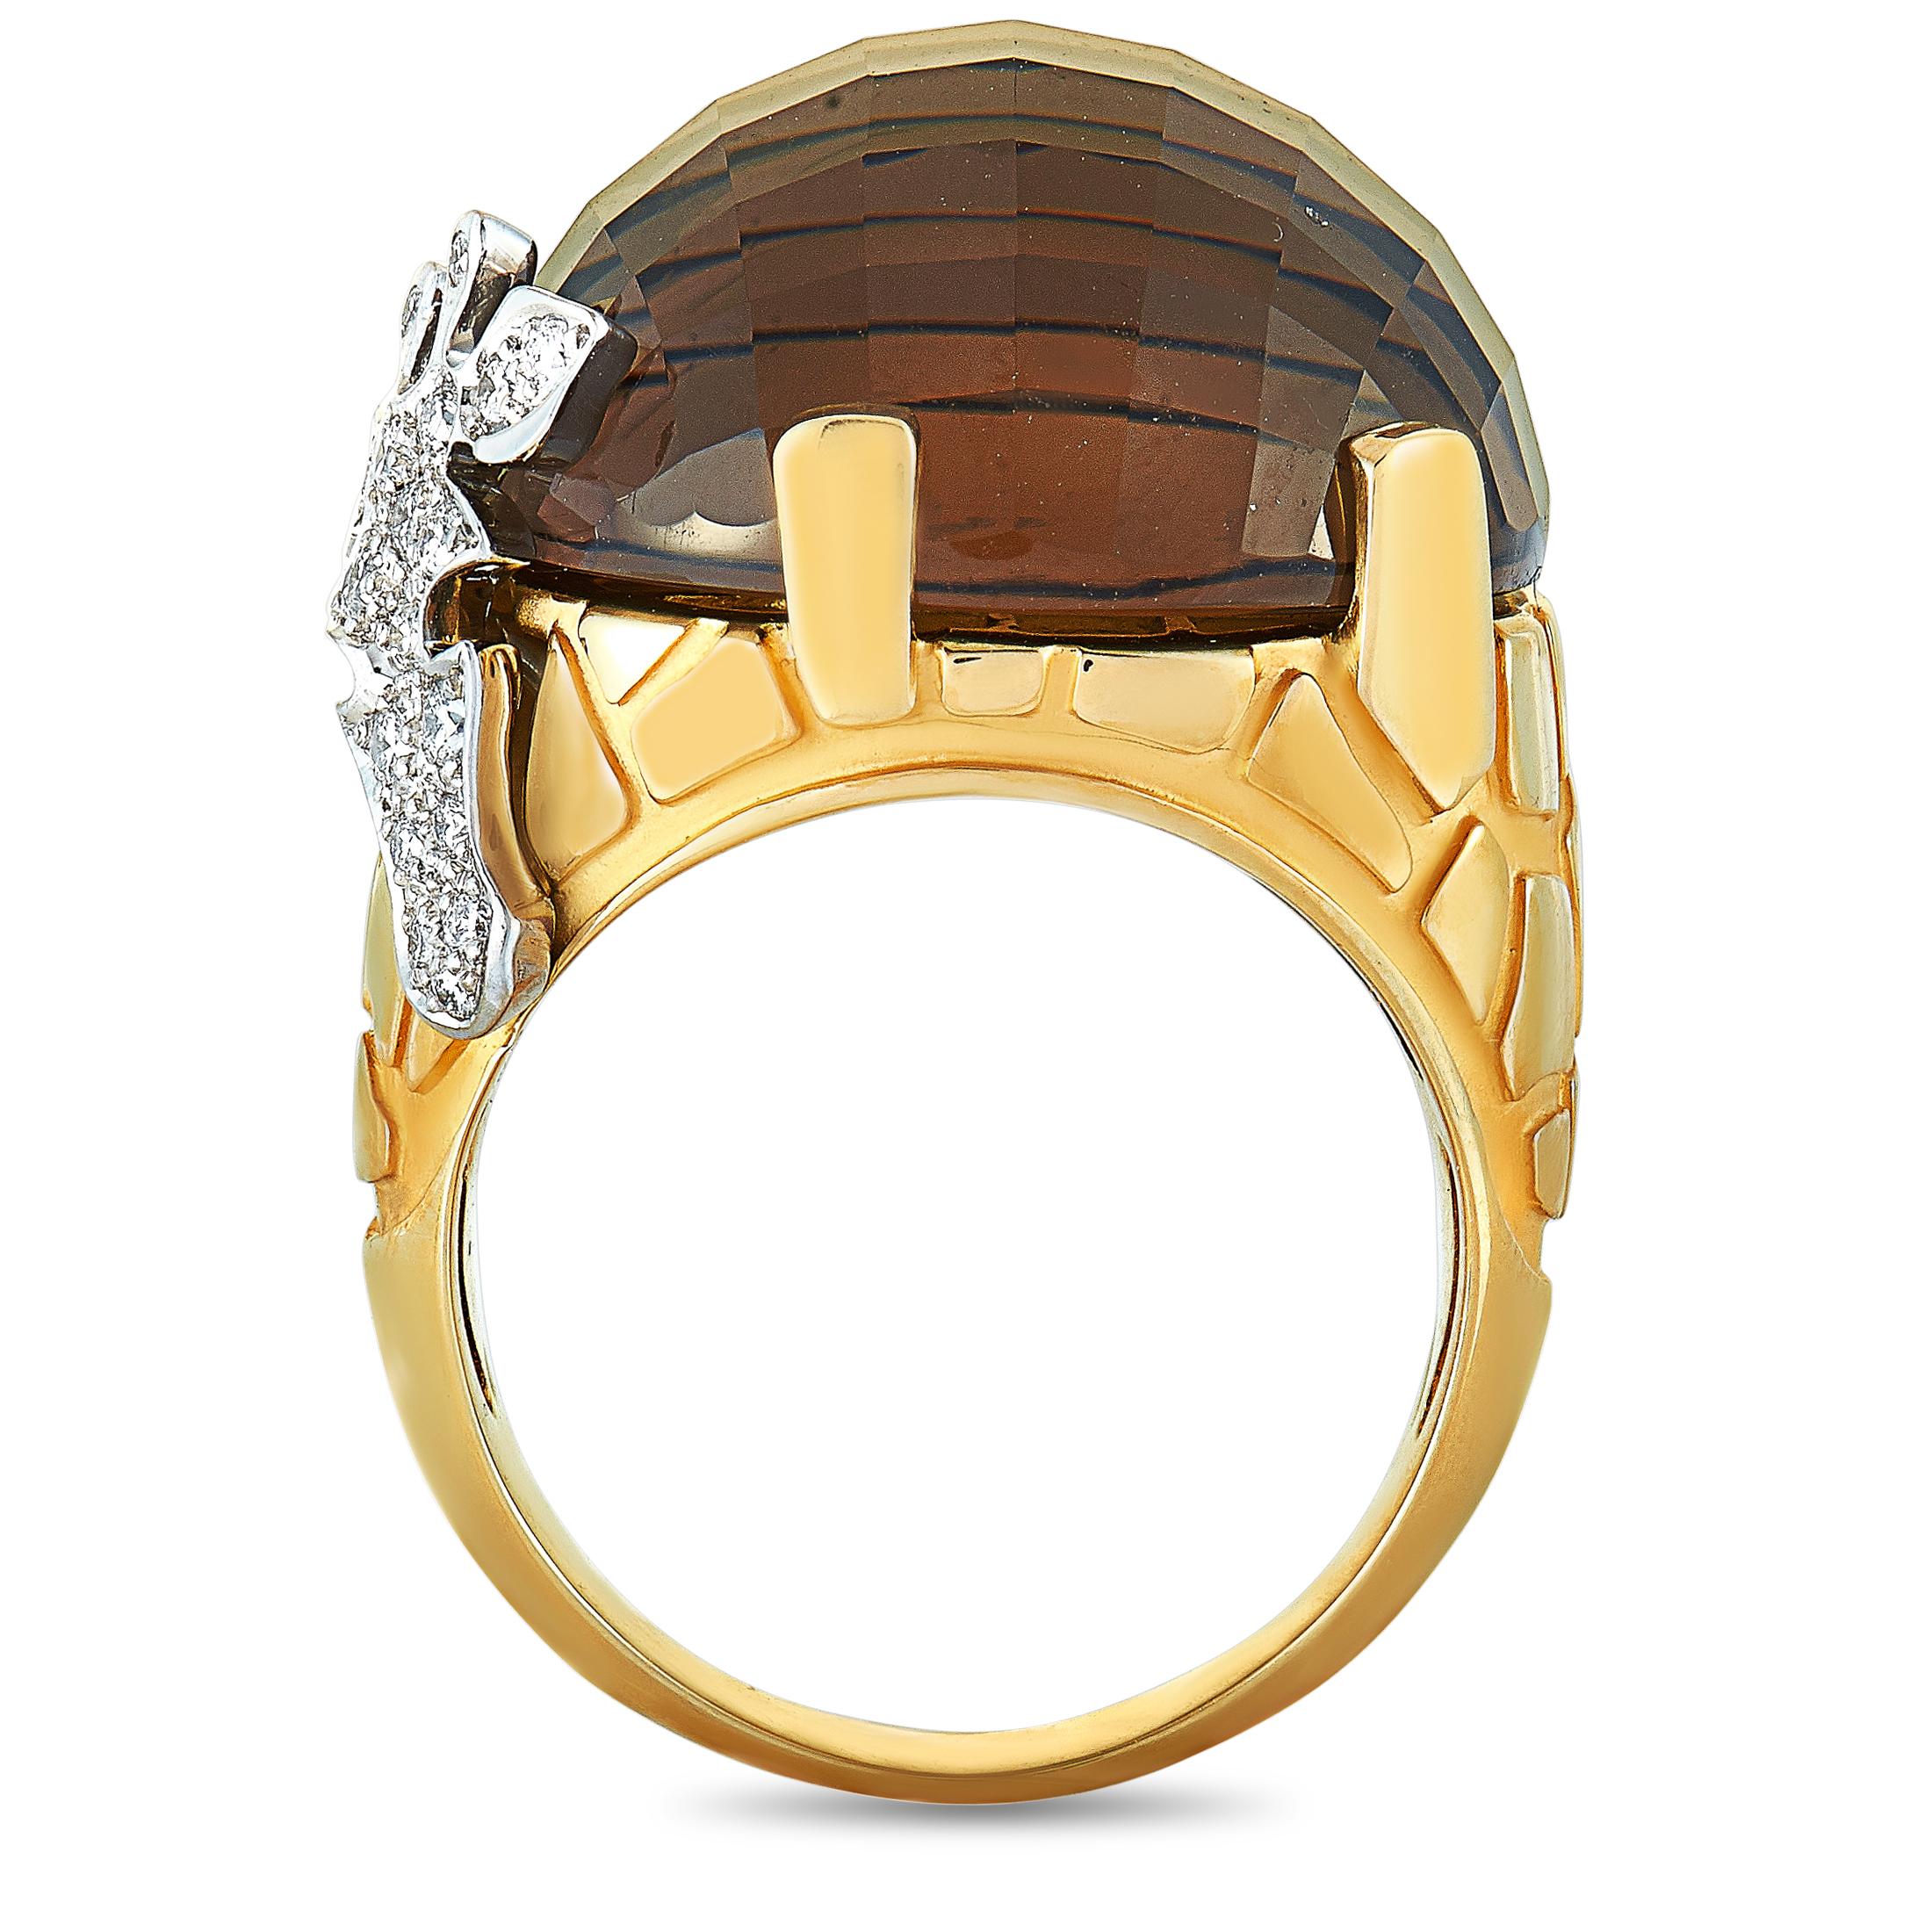 This Carrera y Carrera ring is made out of 18K yellow and white gold and set with diamonds and a smoky quartz. The ring weighs 23.6 grams, boasting band thickness of 4 mm and top height of 14 mm, while top dimensions measure 22 by 20 mm.

Offered in